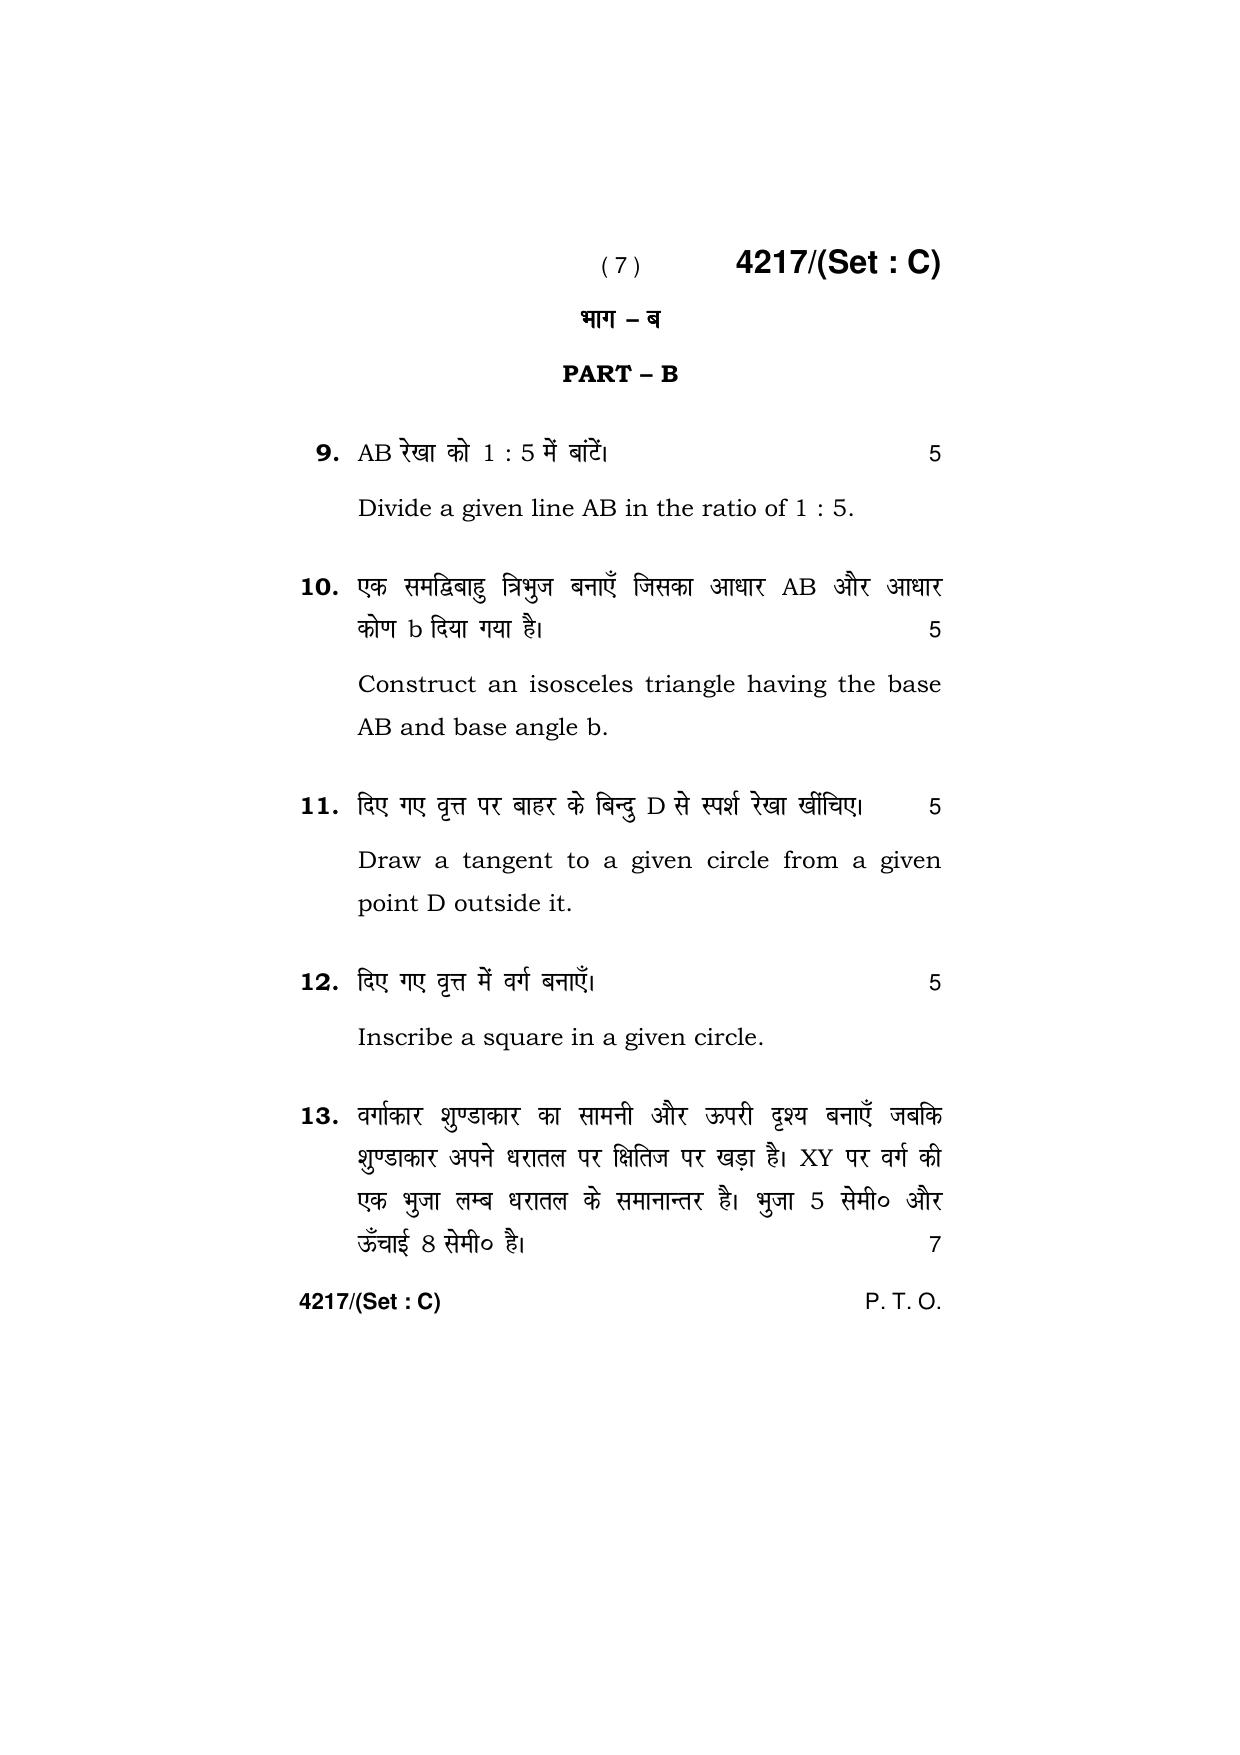 Haryana Board HBSE Class 10 Drawing (All Set) 2019 Question Paper - Page 23